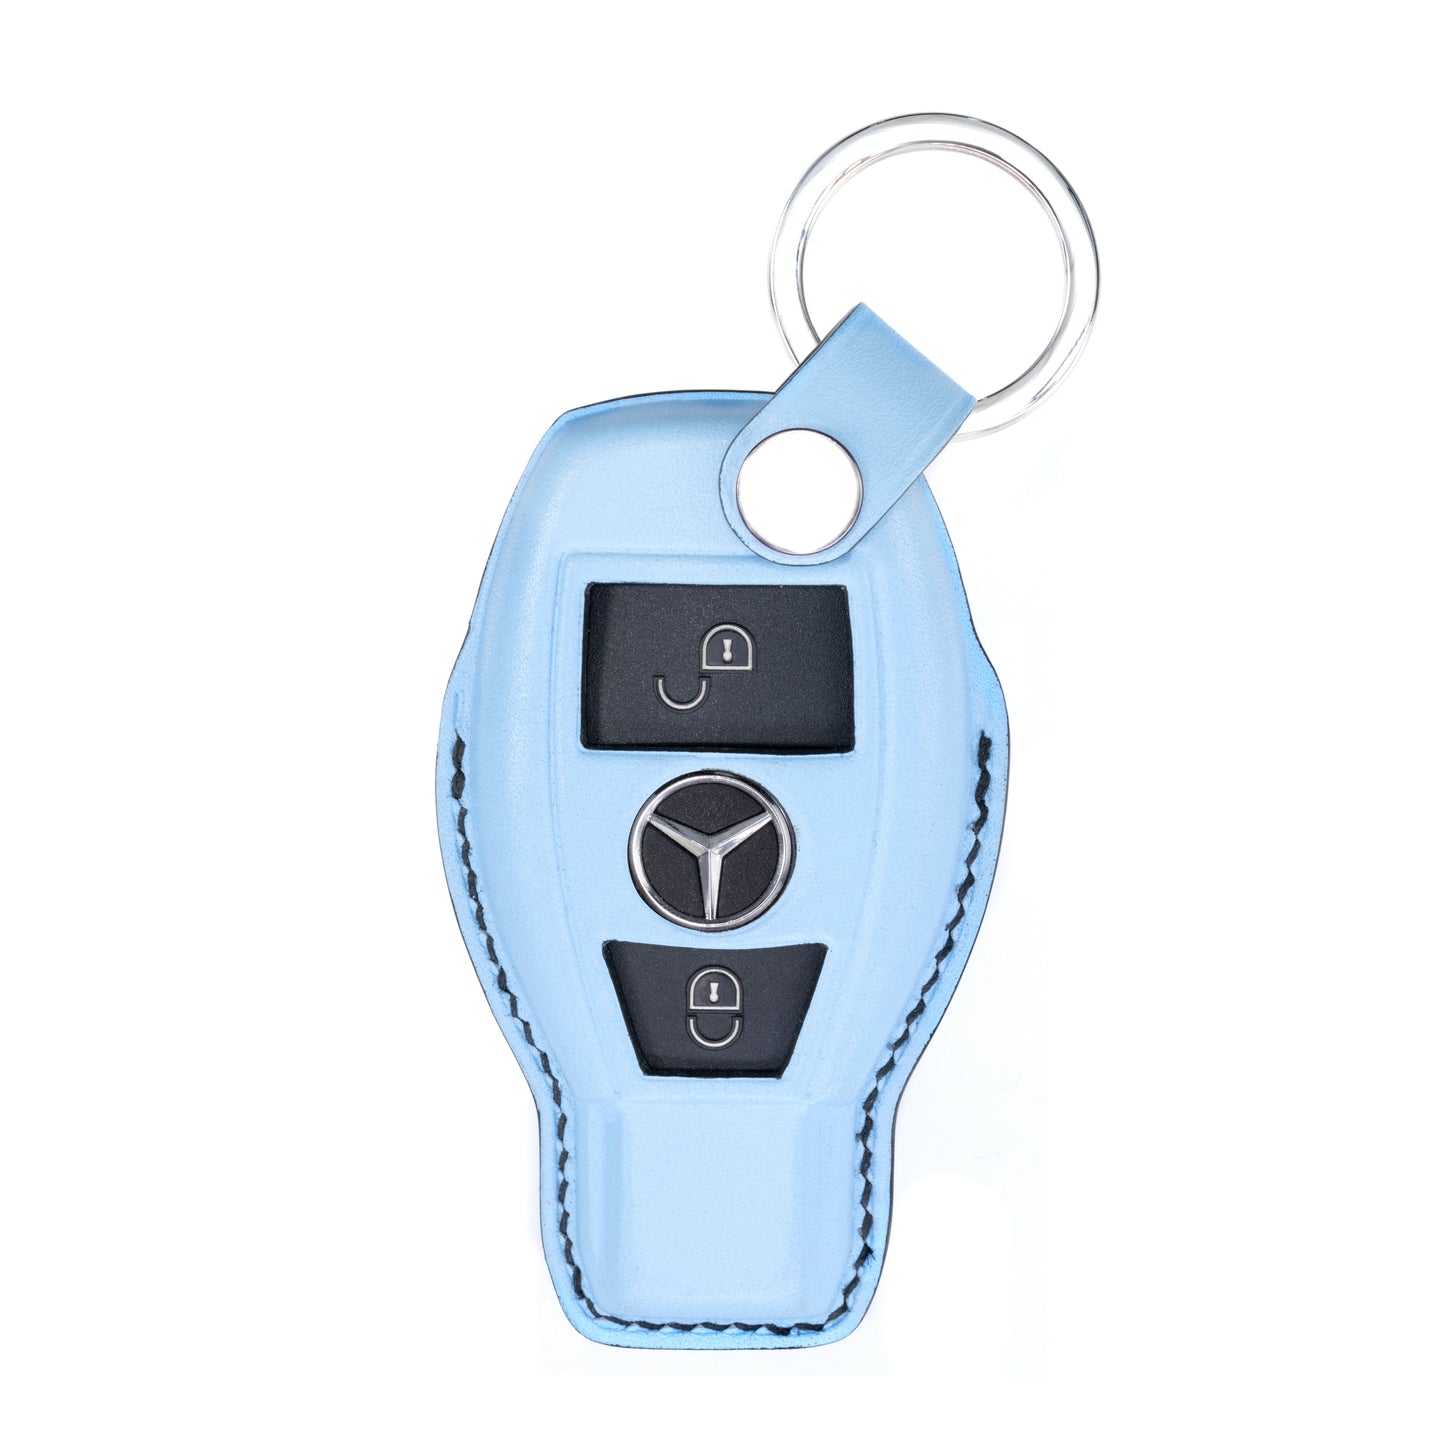 Mercedes 2 Buttons Key Fob Cover in Baby Blue Nappa